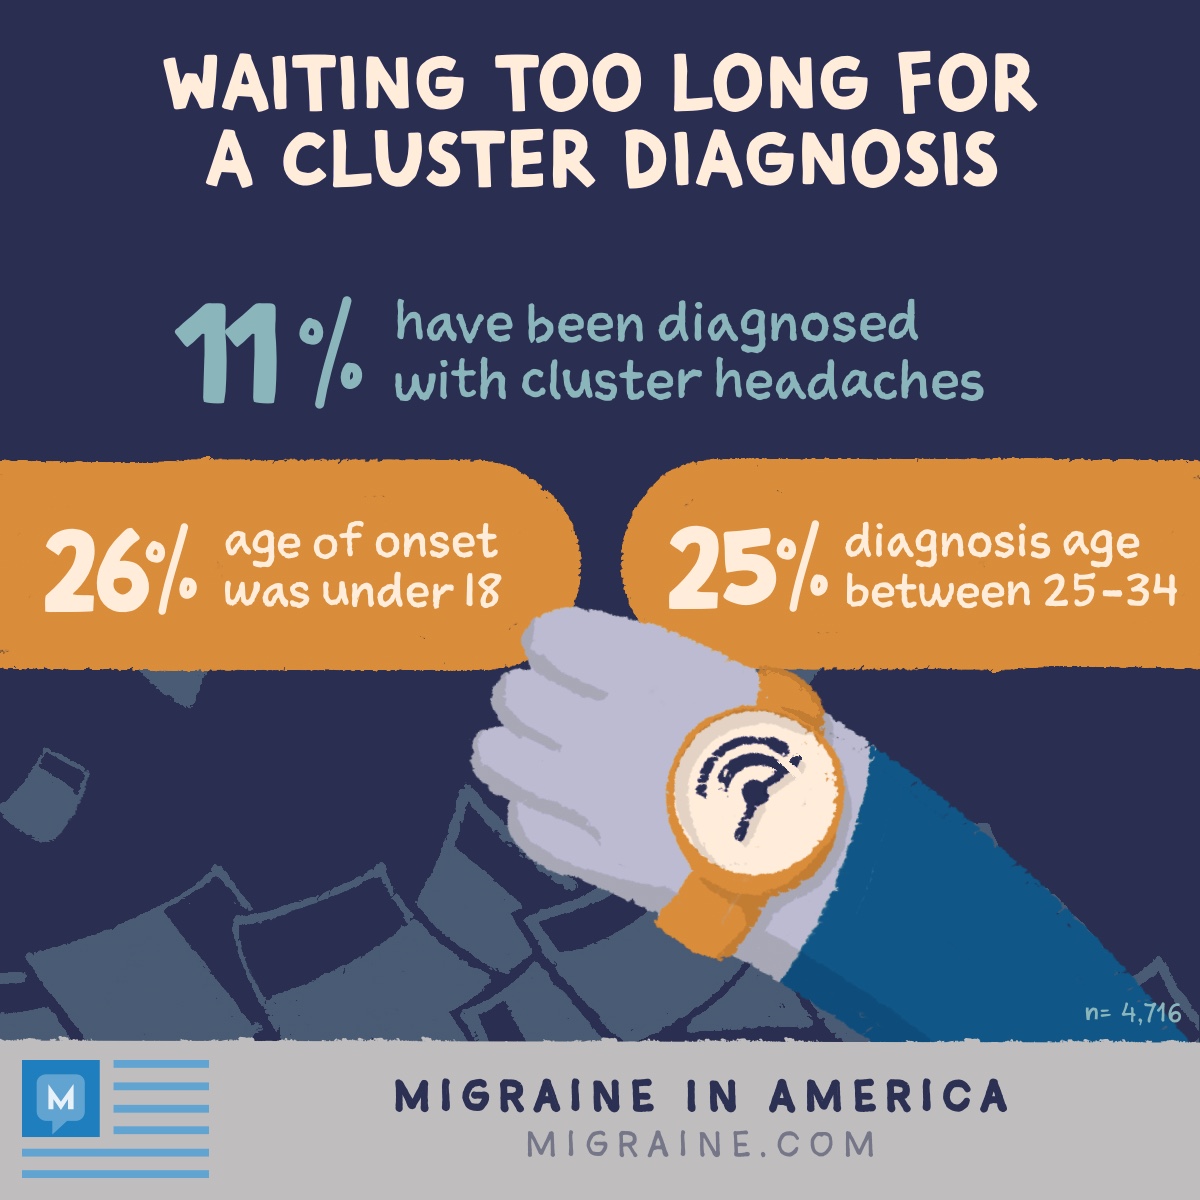 Length of time it took for people to receive a cluster diagnosis